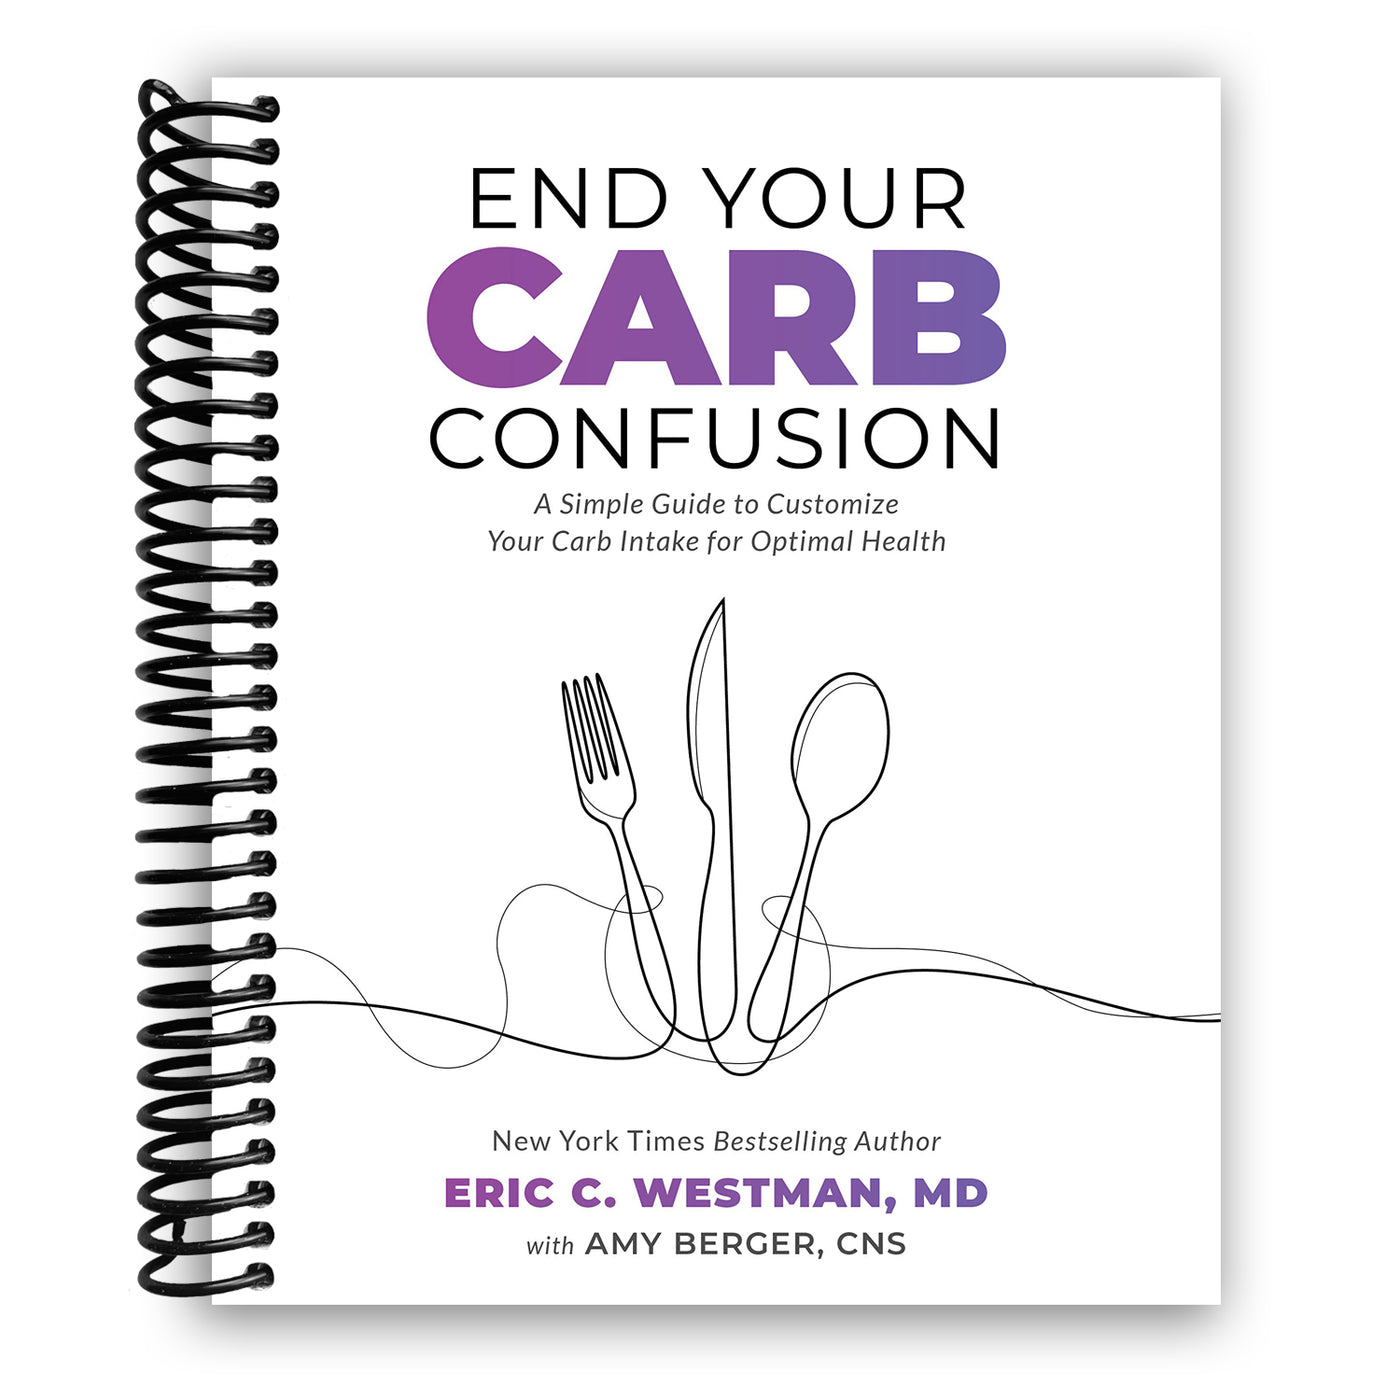 End Your Carb Confusion: A Simple Guide to Customize Your Carb Intake for Optimal Health (Spiral Bound)